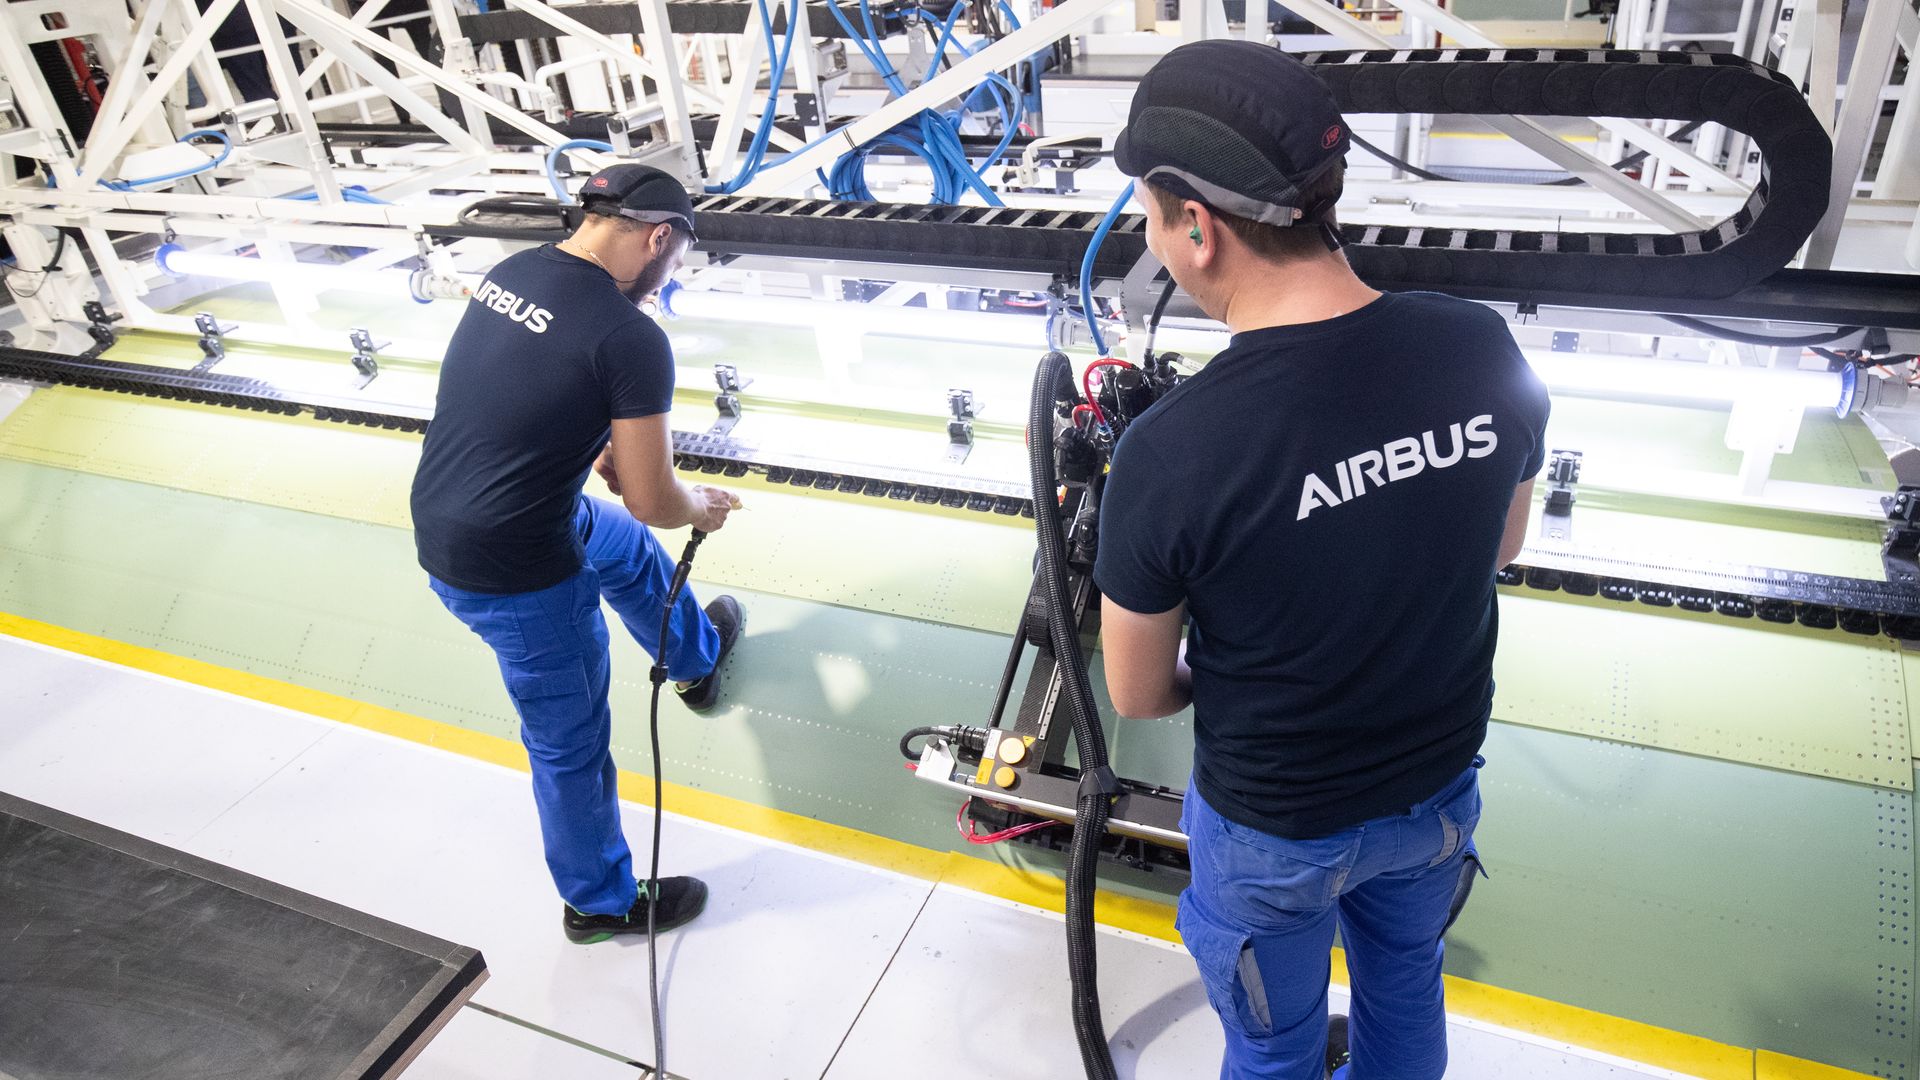 In this image, two men wearing shirts with the Airbus logo work on assembling an Airbus plane